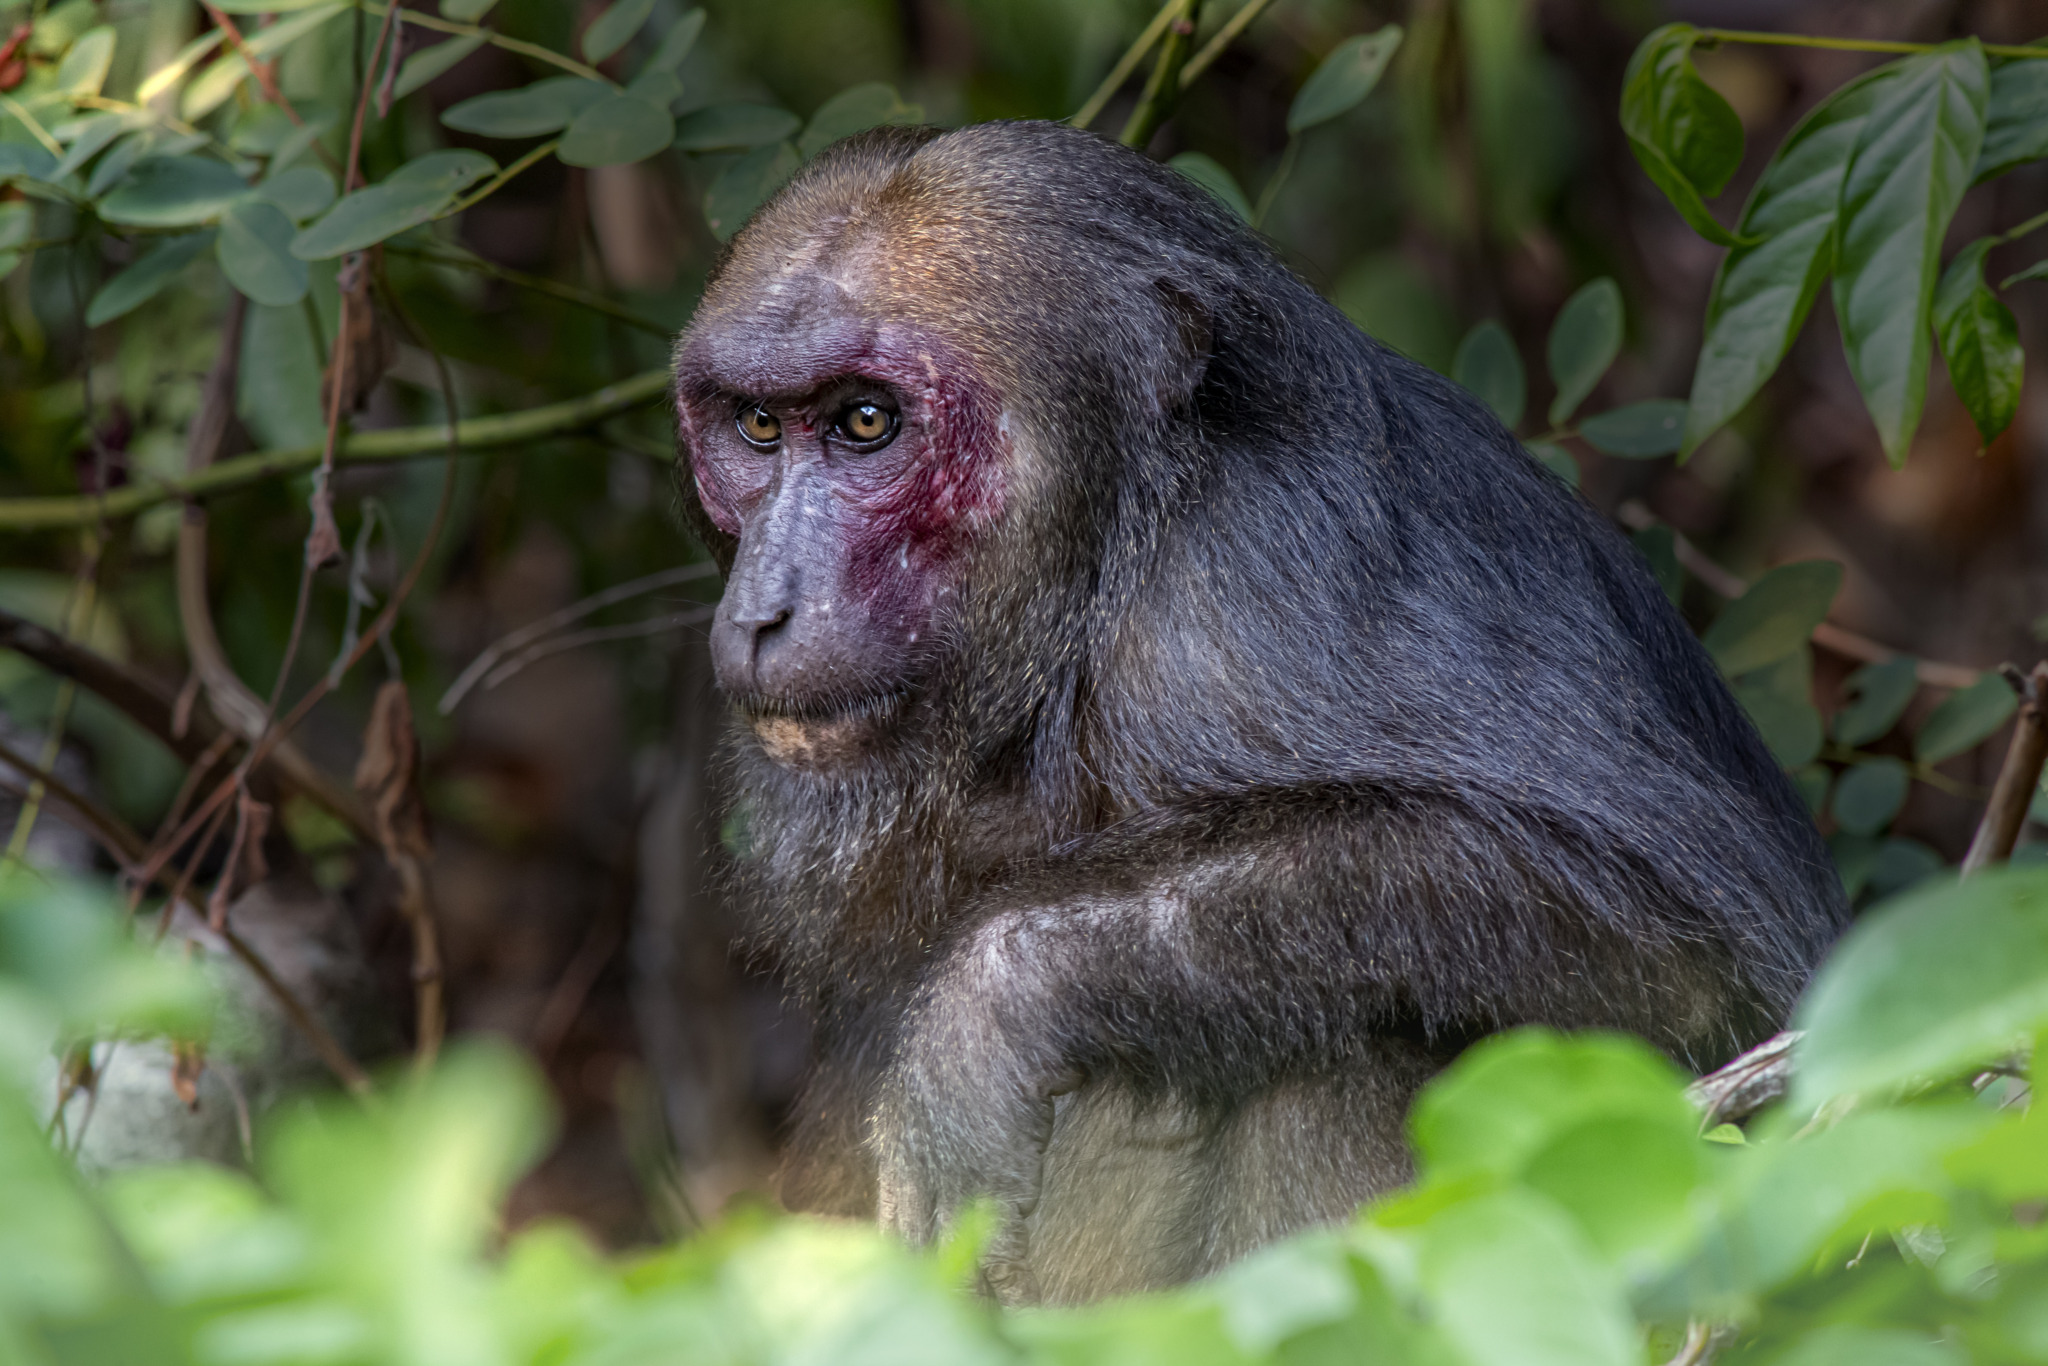 Stump-tailed macaque